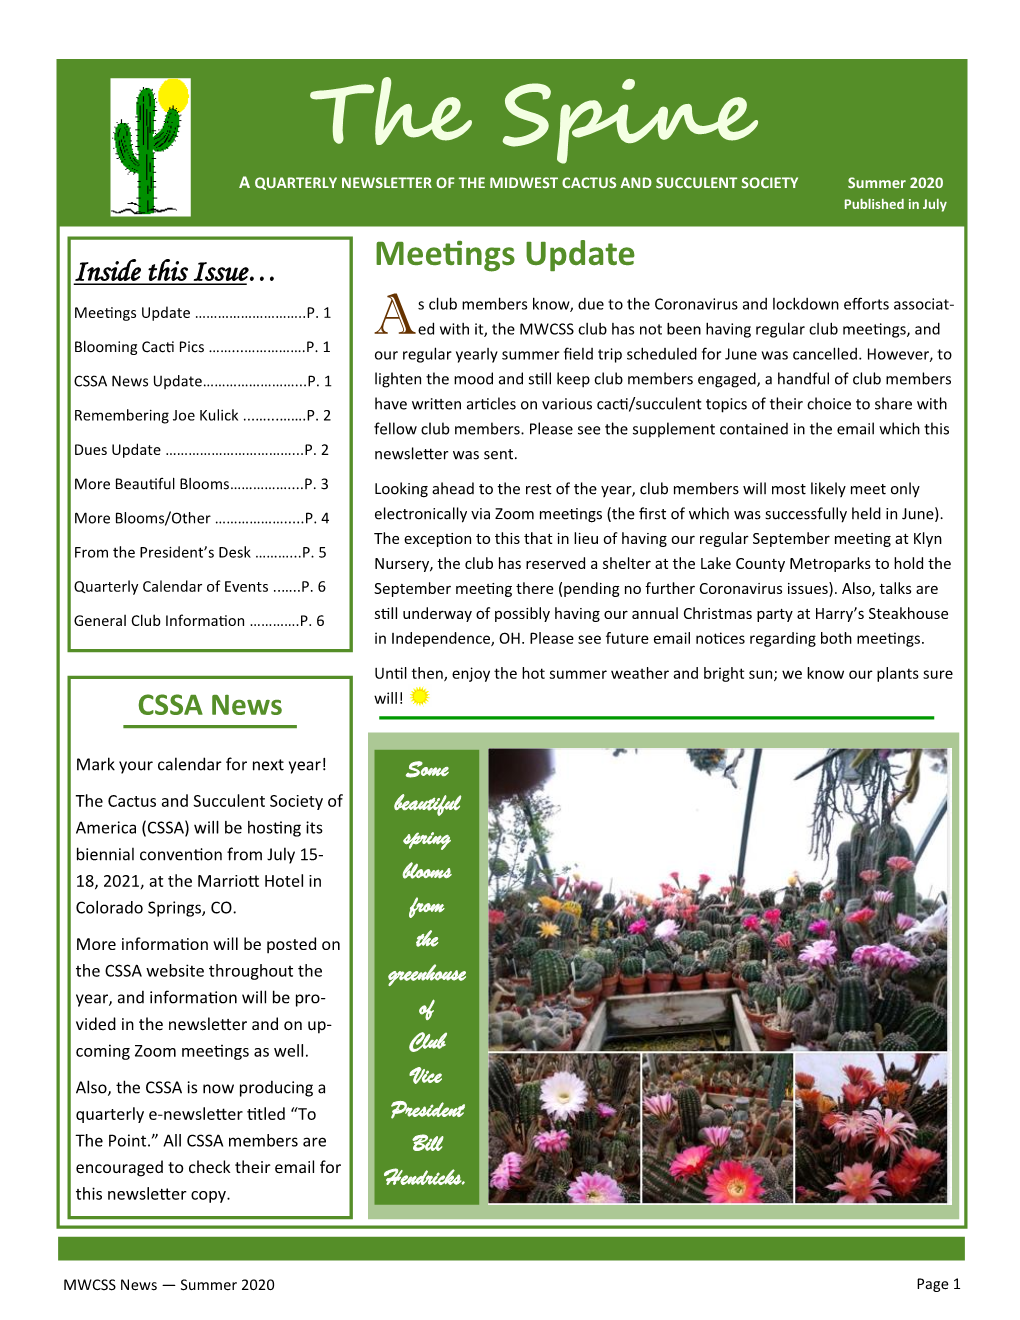 The Spine a QUARTERLY NEWSLETTER of the MIDWEST CACTUS and SUCCULENT SOCIETY Summer 2020 Published in July